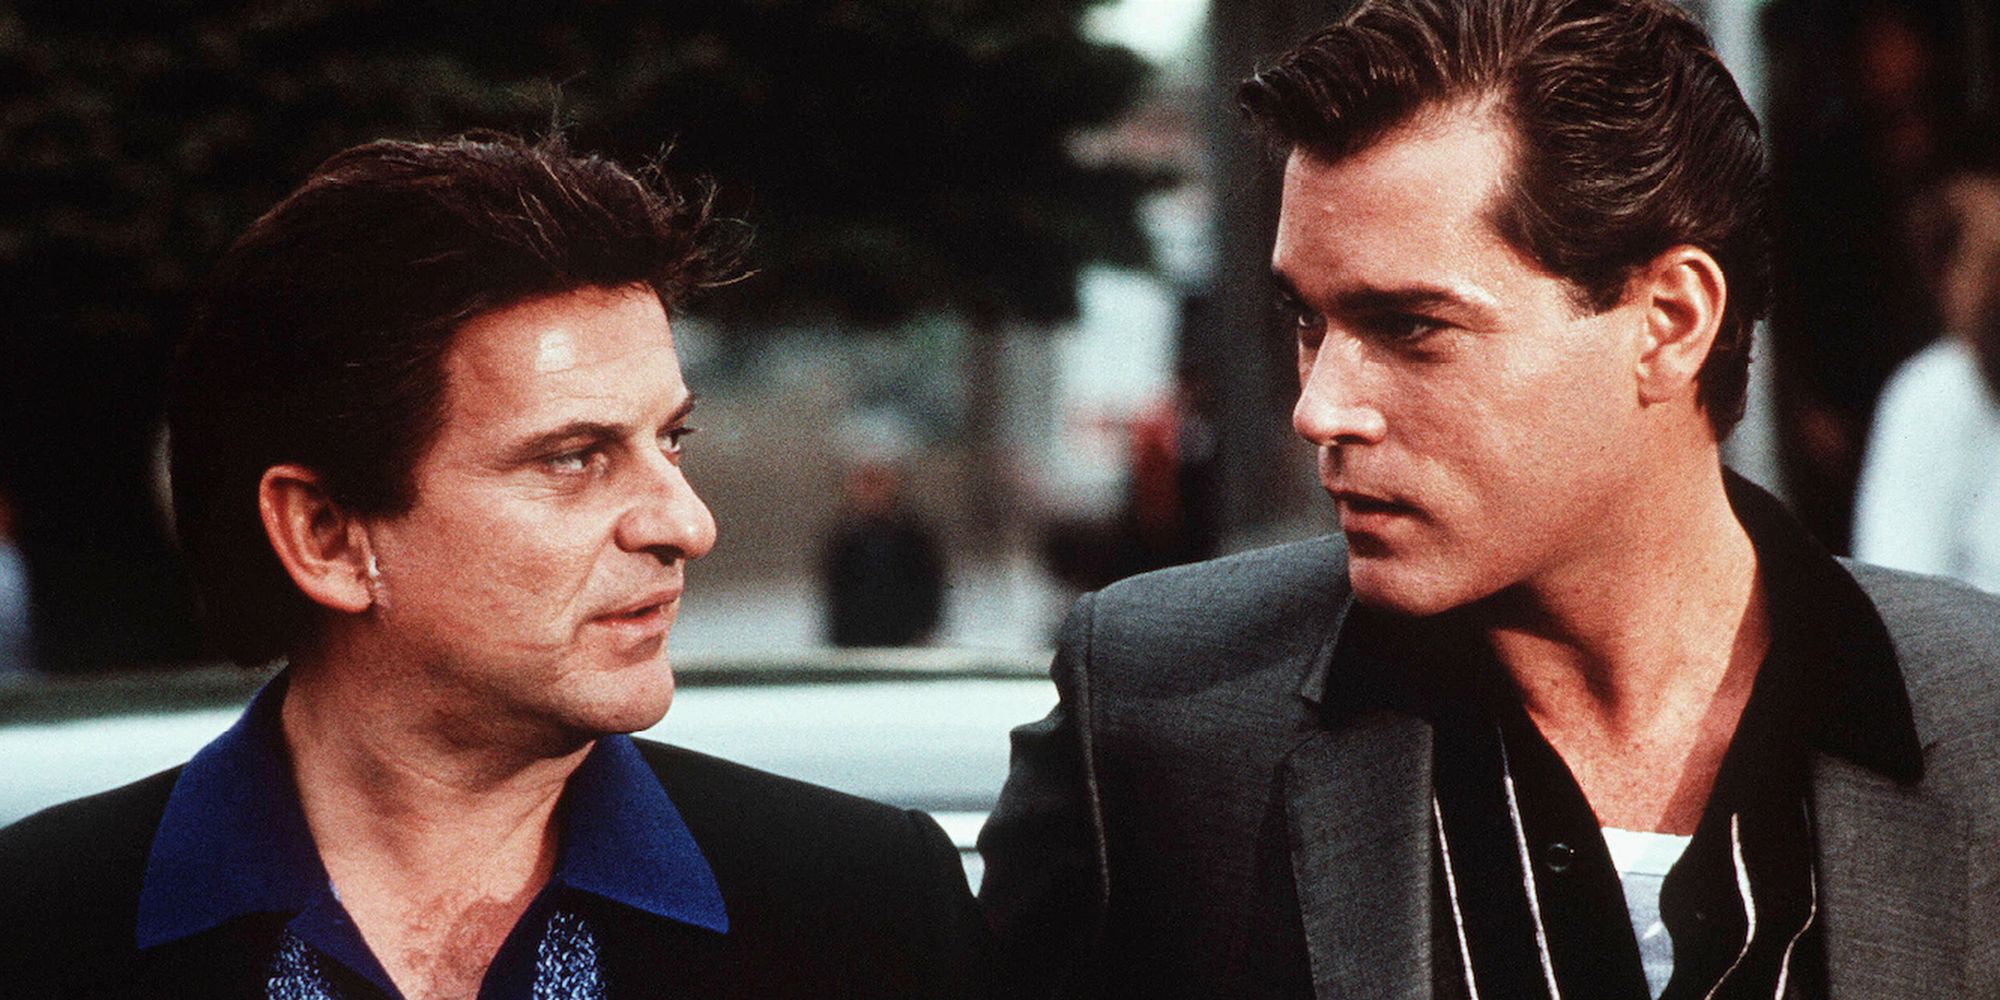 Joe Pesci and Ray Liotta as Tommy DeVito and Henry Hill in Goodfellas